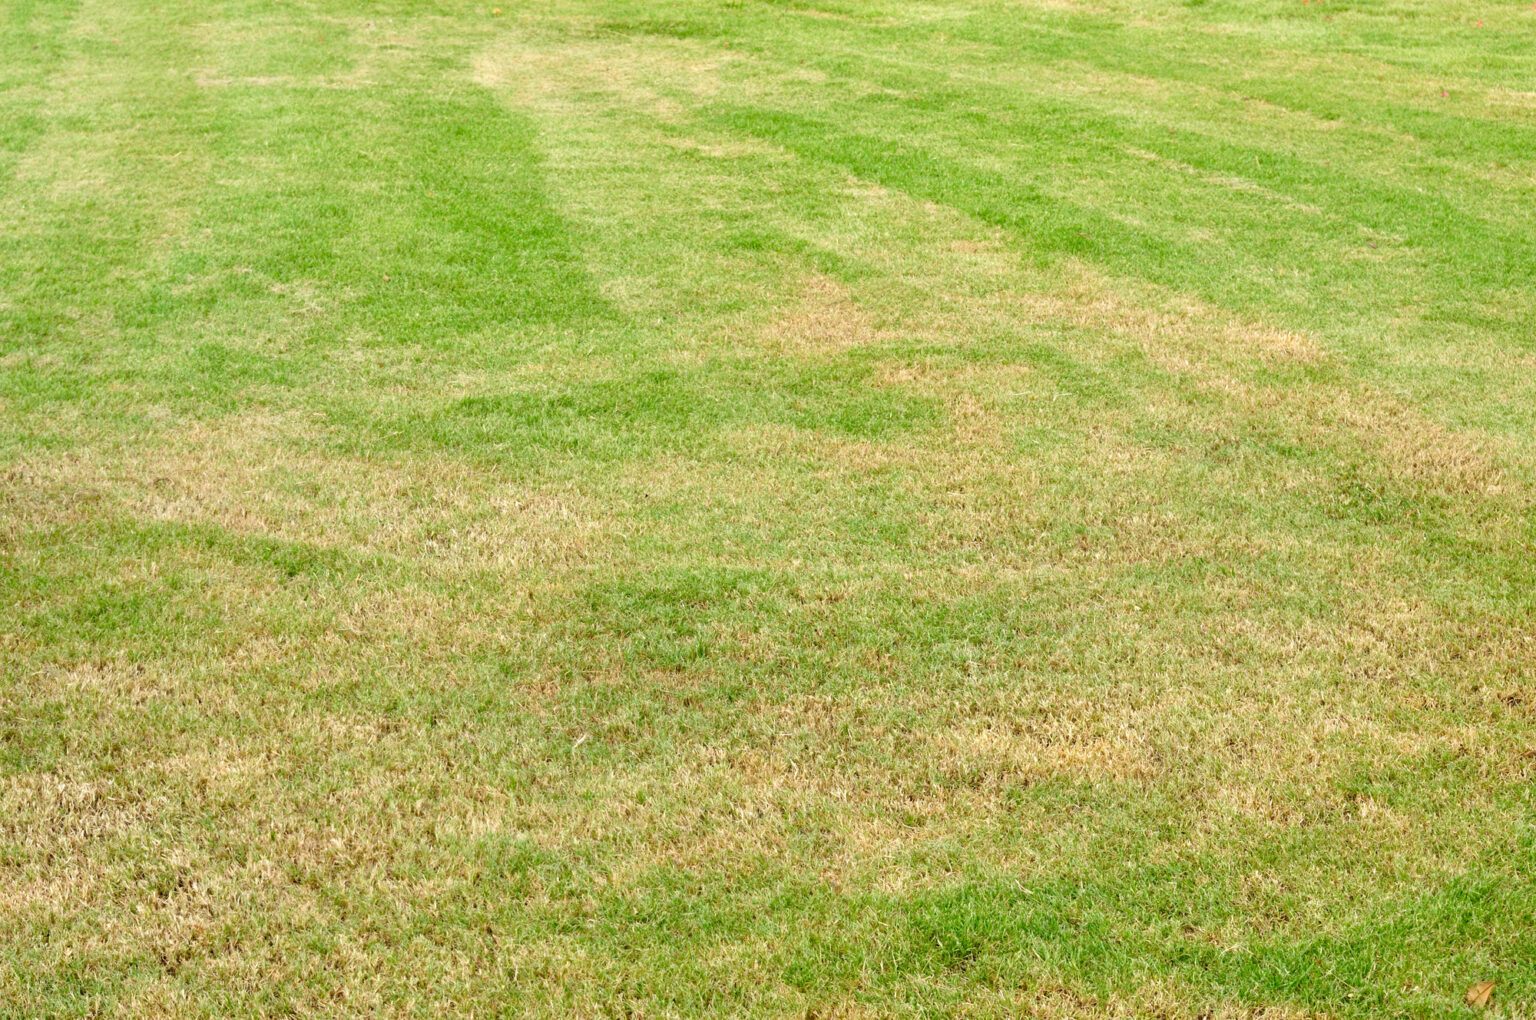 Causes And Solutions For Brown Spots In Grass Lives On